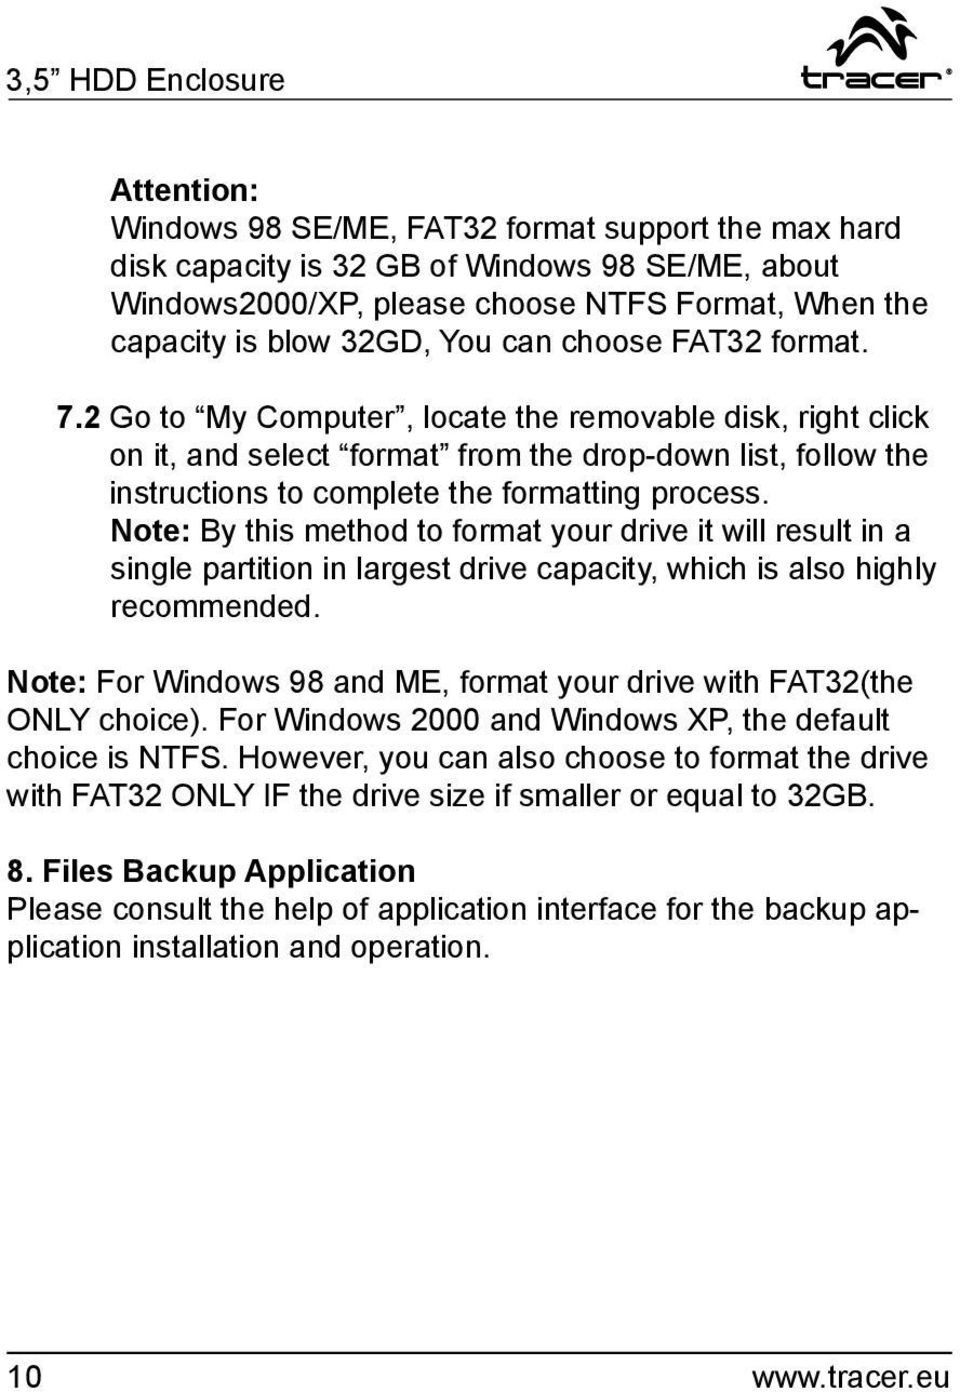 2 Go to My Computer, locate the removable disk, right click on it, and select format from the drop-down list, follow the instructions to complete the formatting process.